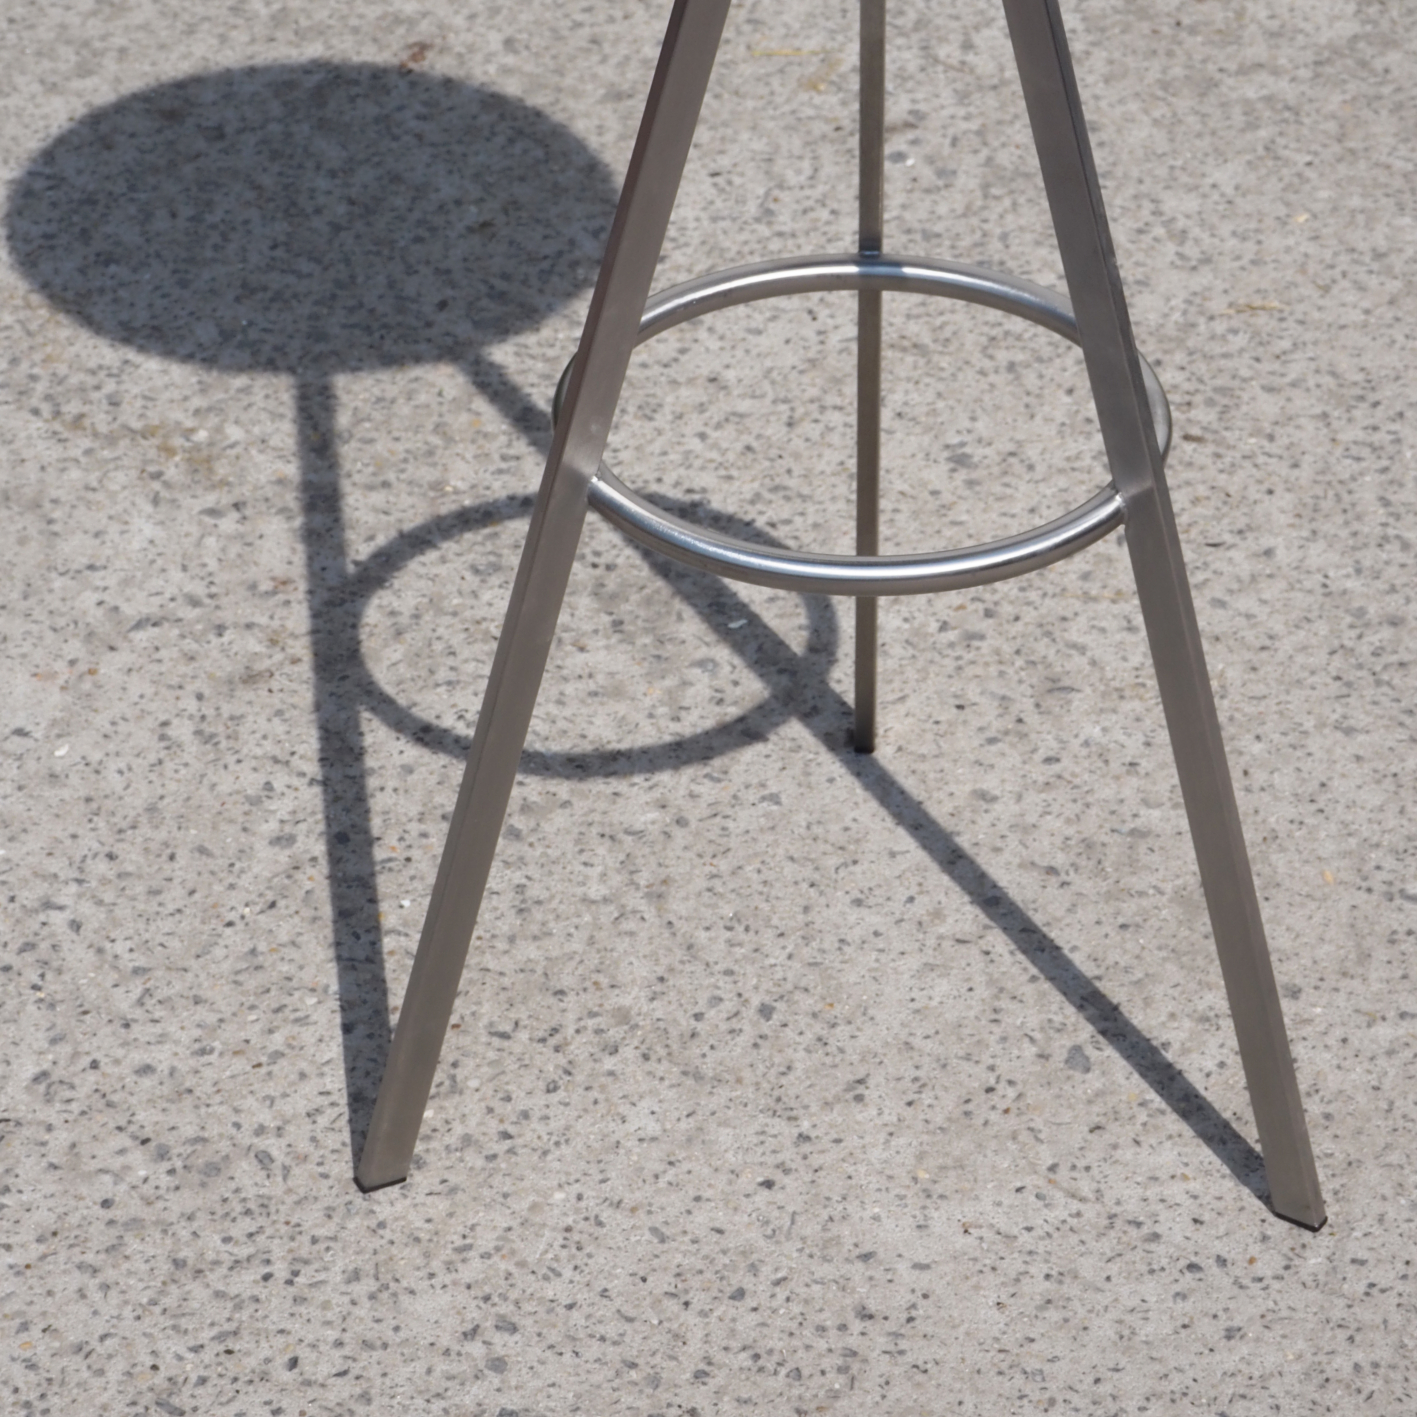 Light bar stool 'Tri-Space' by Terence Woodgate for Case